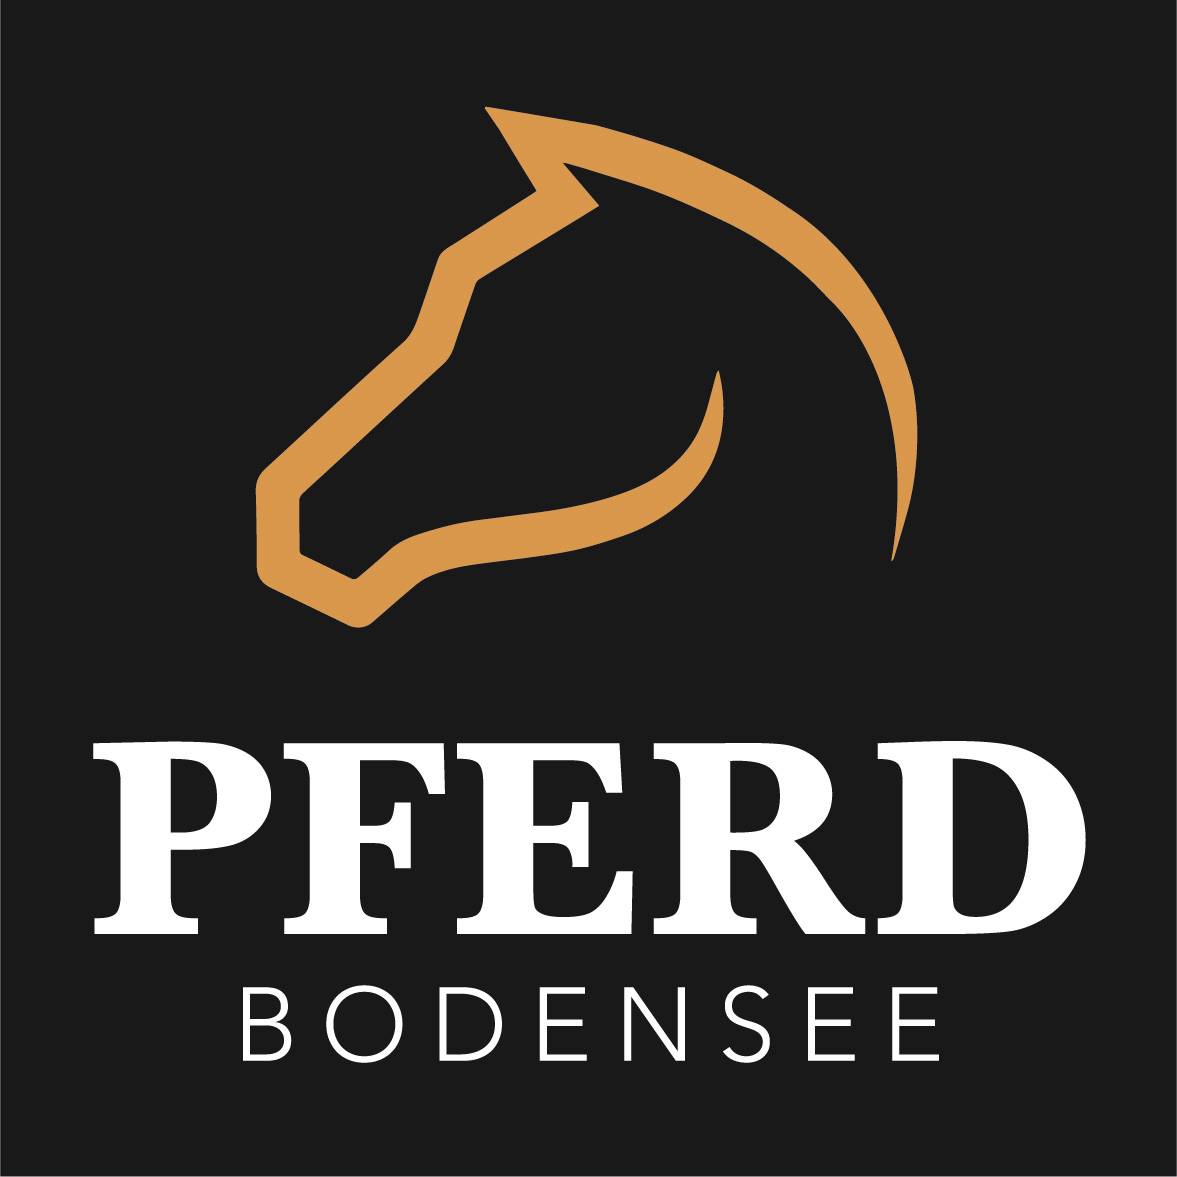 Pferd Bodensee - we are ready!